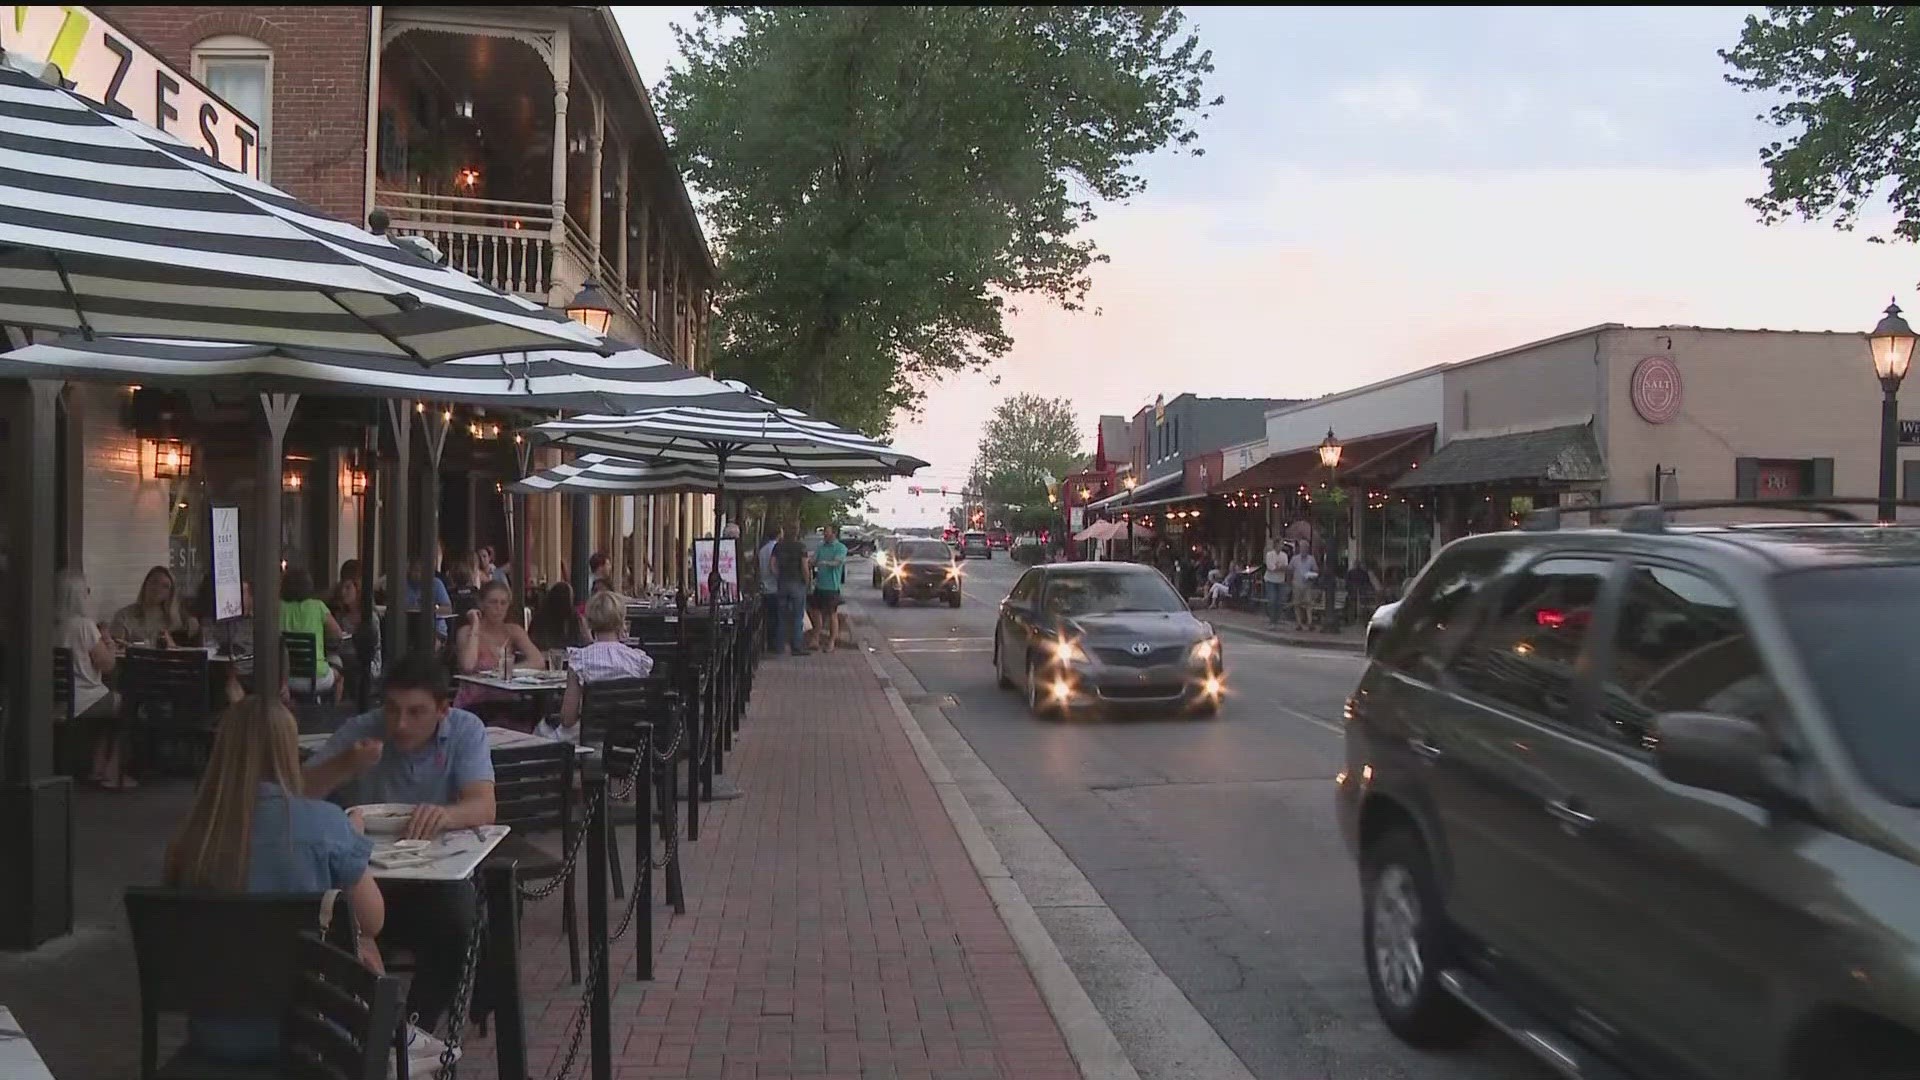 The Roswell mayor is a proponent of shutting down traffic to the street, but business owners are worried.